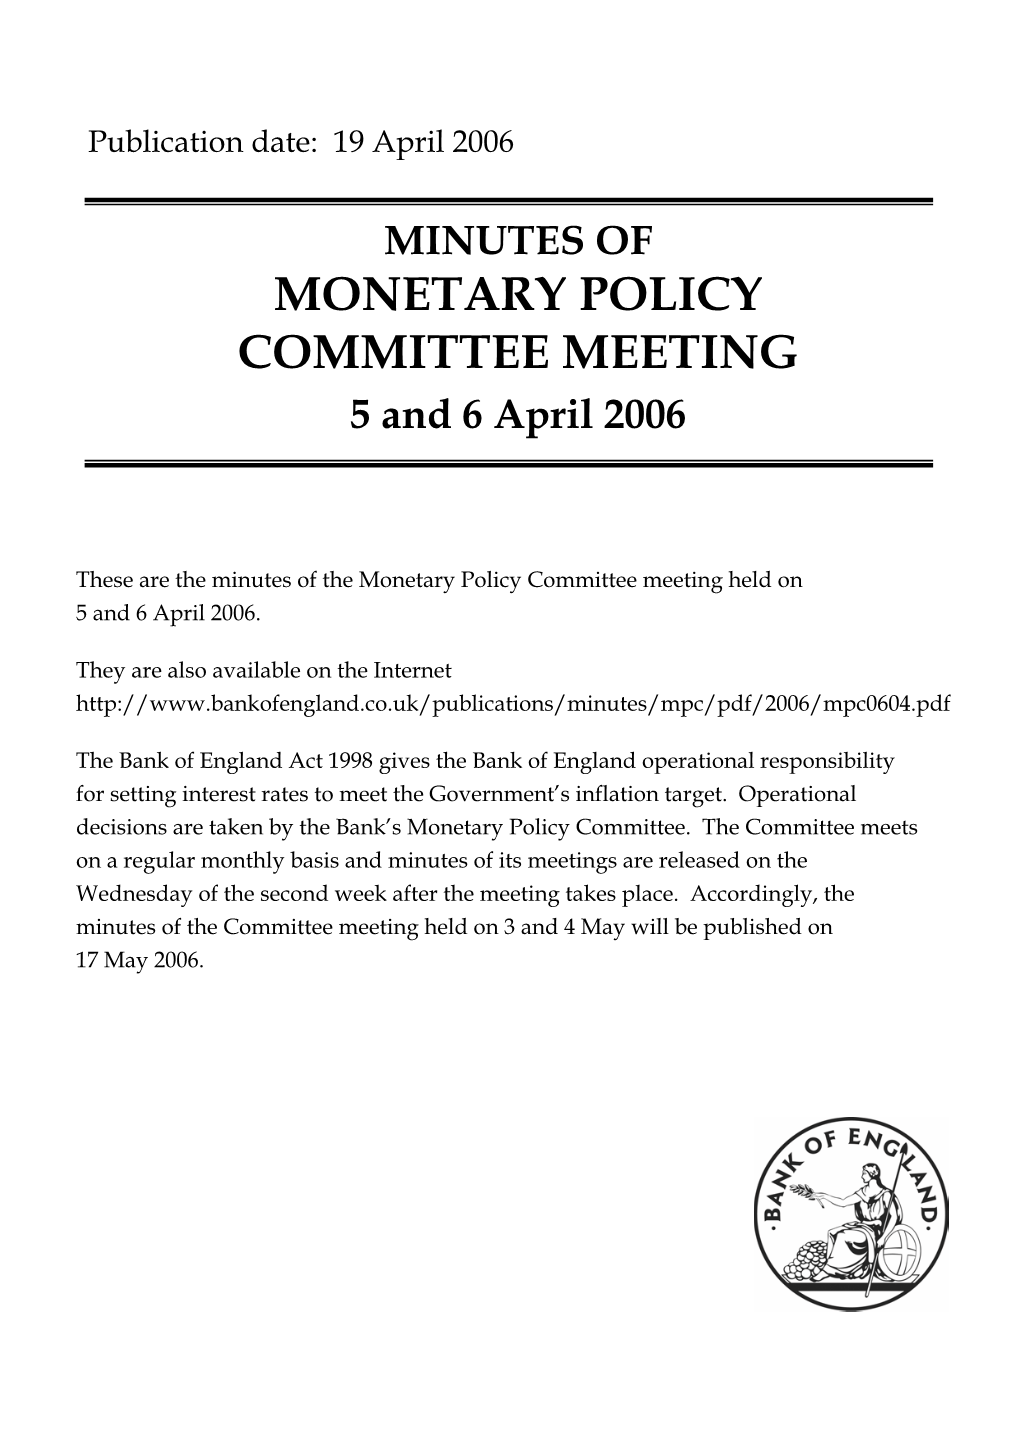 Minutes of the Monetary Policy Committee Meeting Held on 5 and 6 April 2006